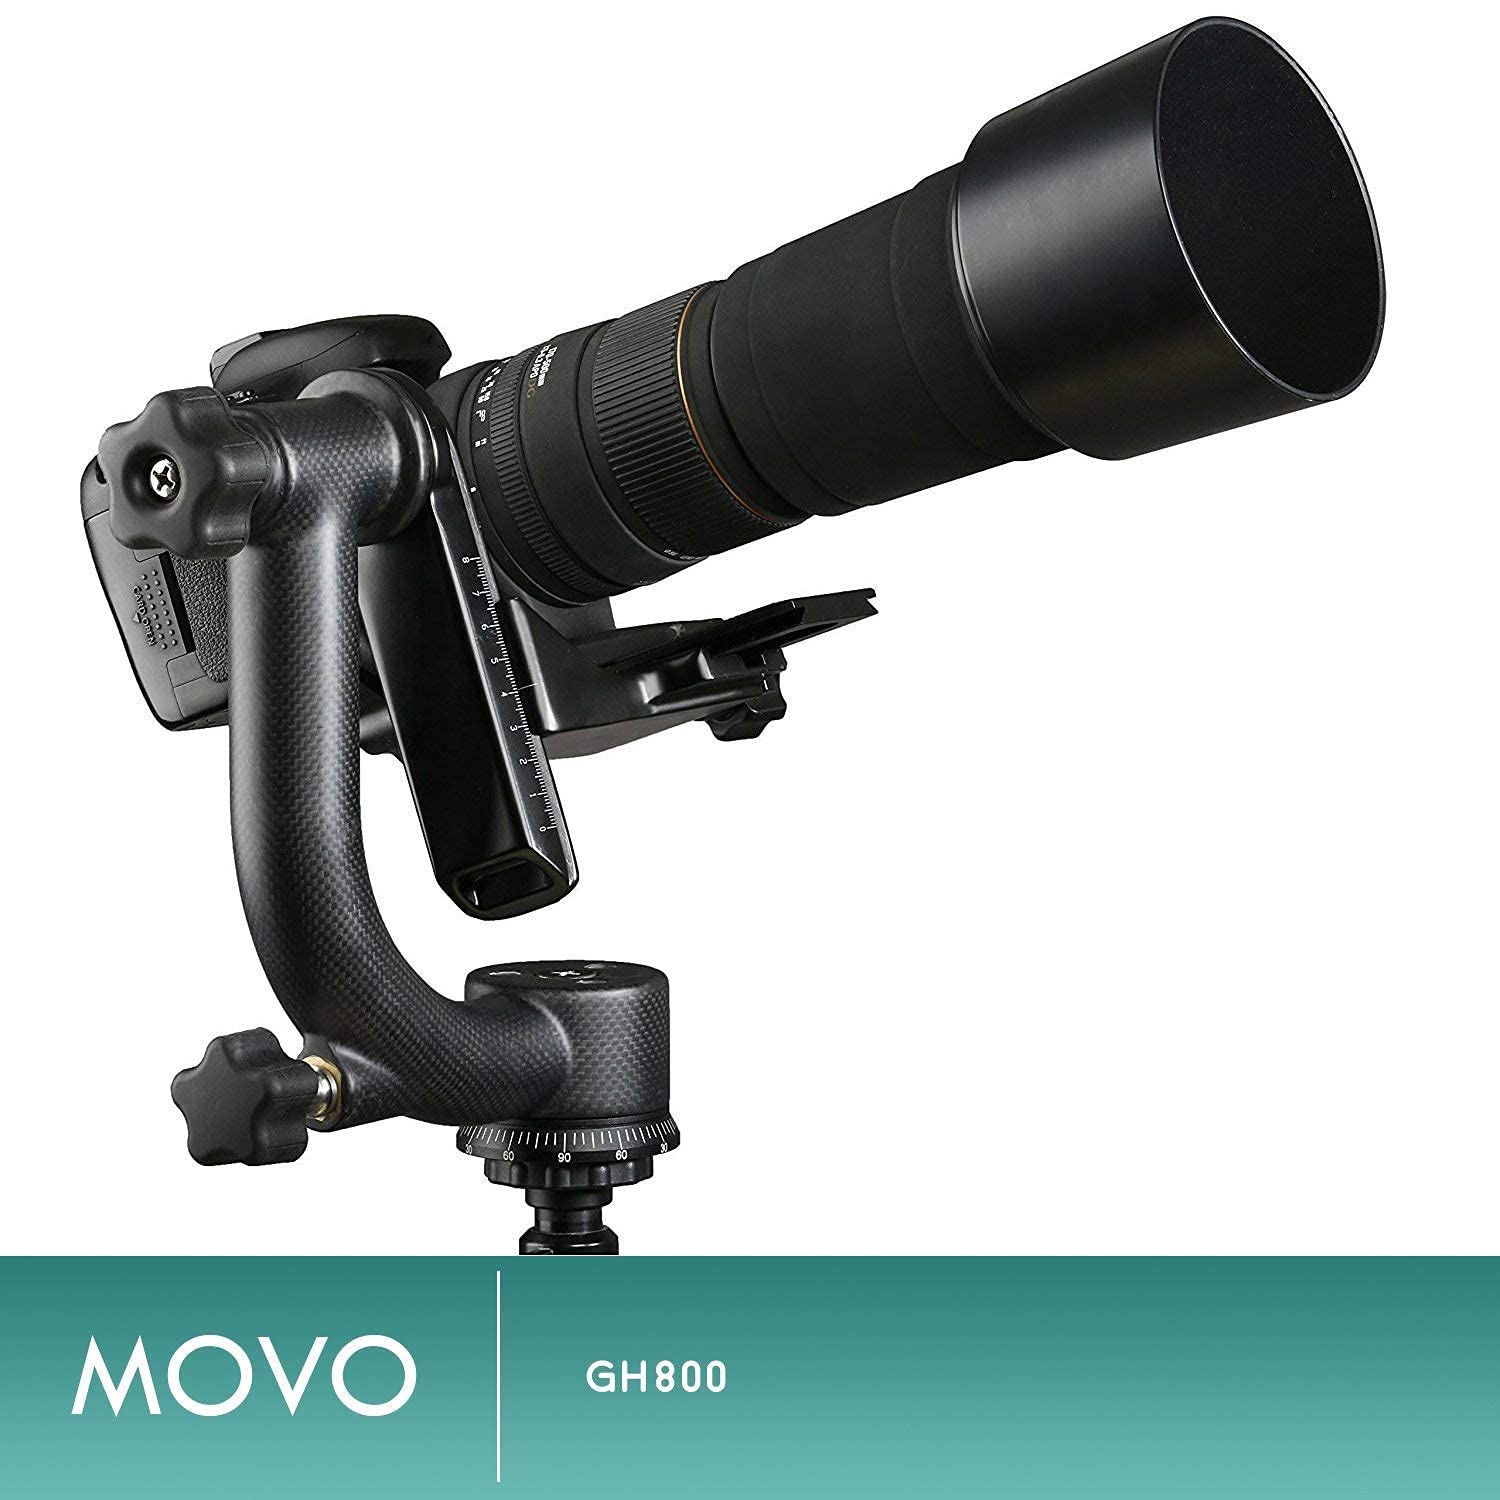 Movo GH800 MKII Carbon Fiber Professional Gimbal Tripod Head with Long and Short Arca-Swiss Quick-Release Plates - for Outdoor Bird/Wildlife Photography  - Good